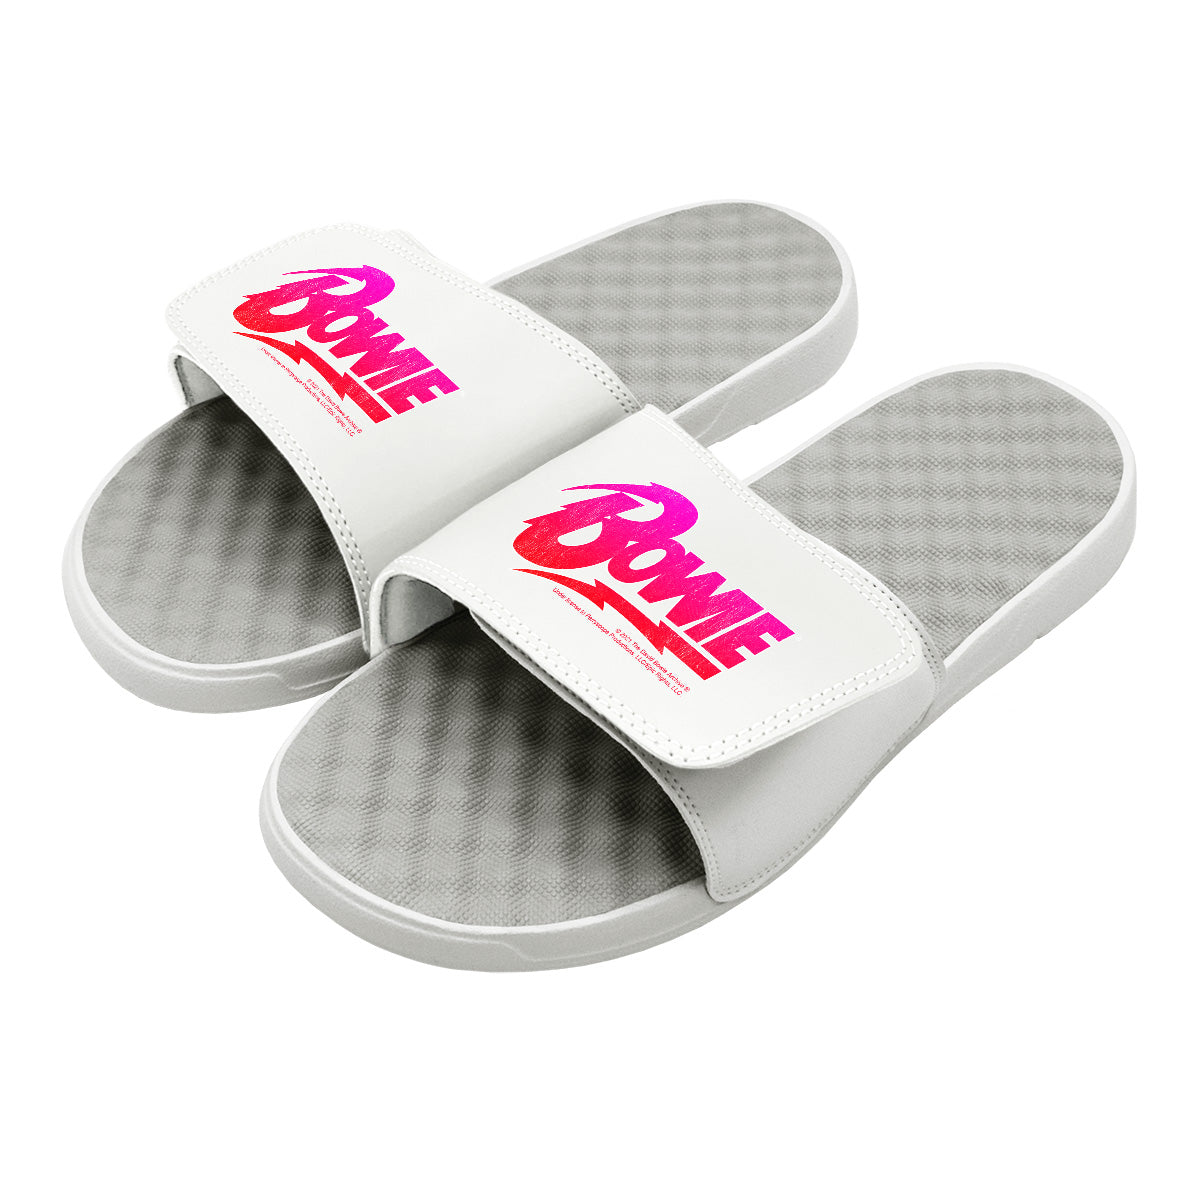 Pink and Red Bowie Logo David Bowie Slides